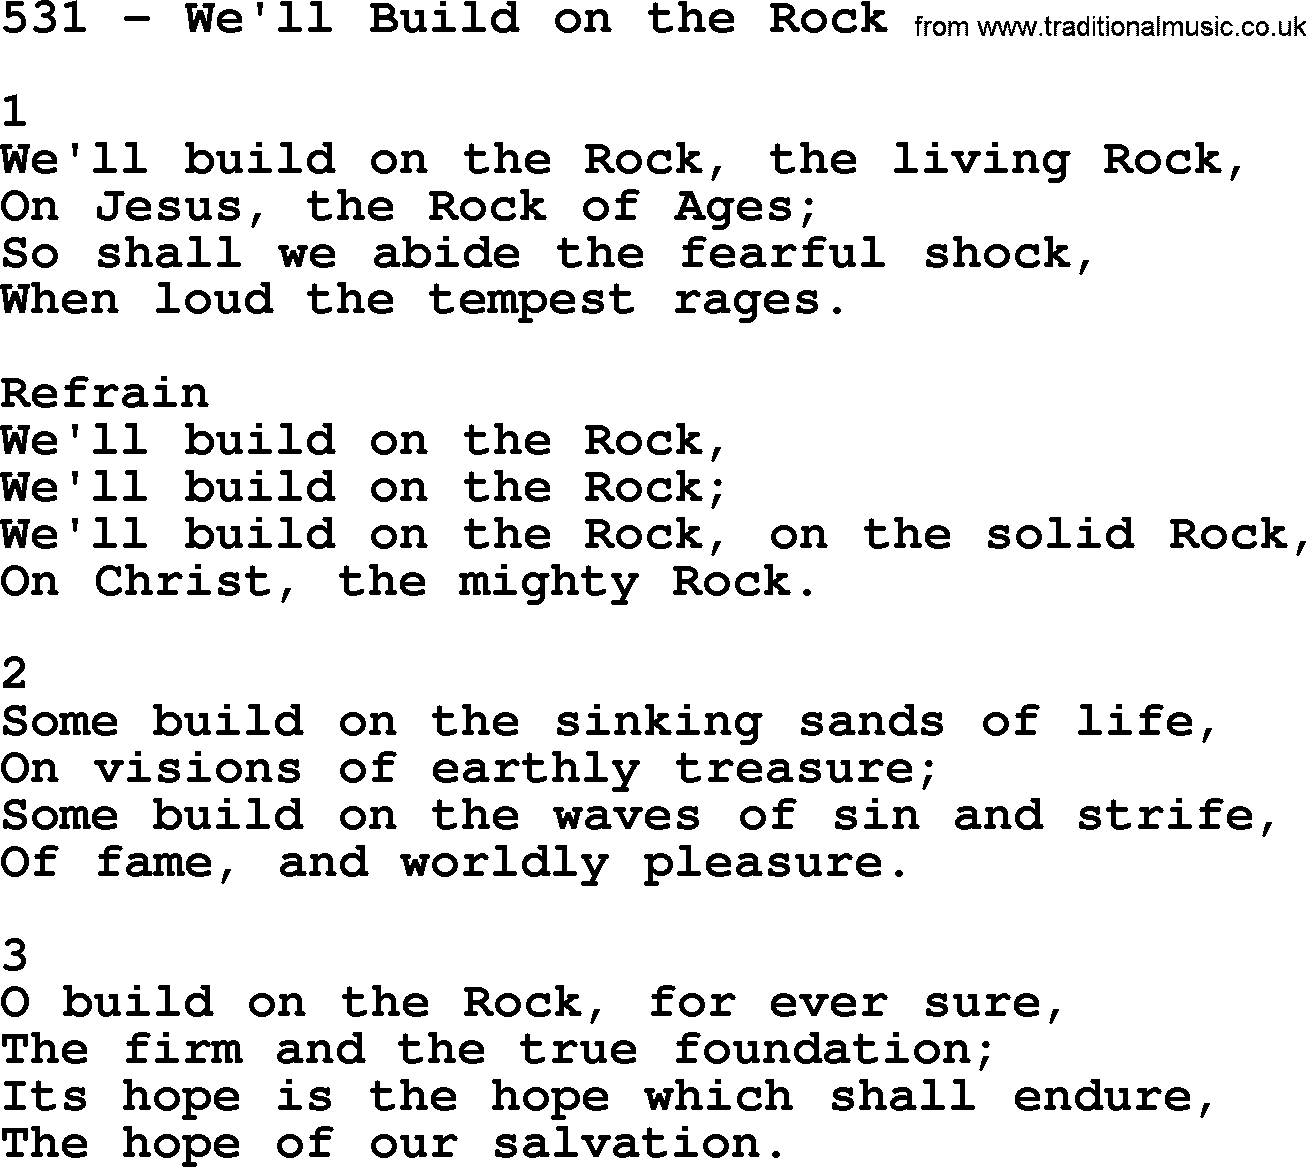 Complete Adventis Hymnal, title: 531-We'll Build On The Rock, with lyrics, midi, mp3, powerpoints(PPT) and PDF,